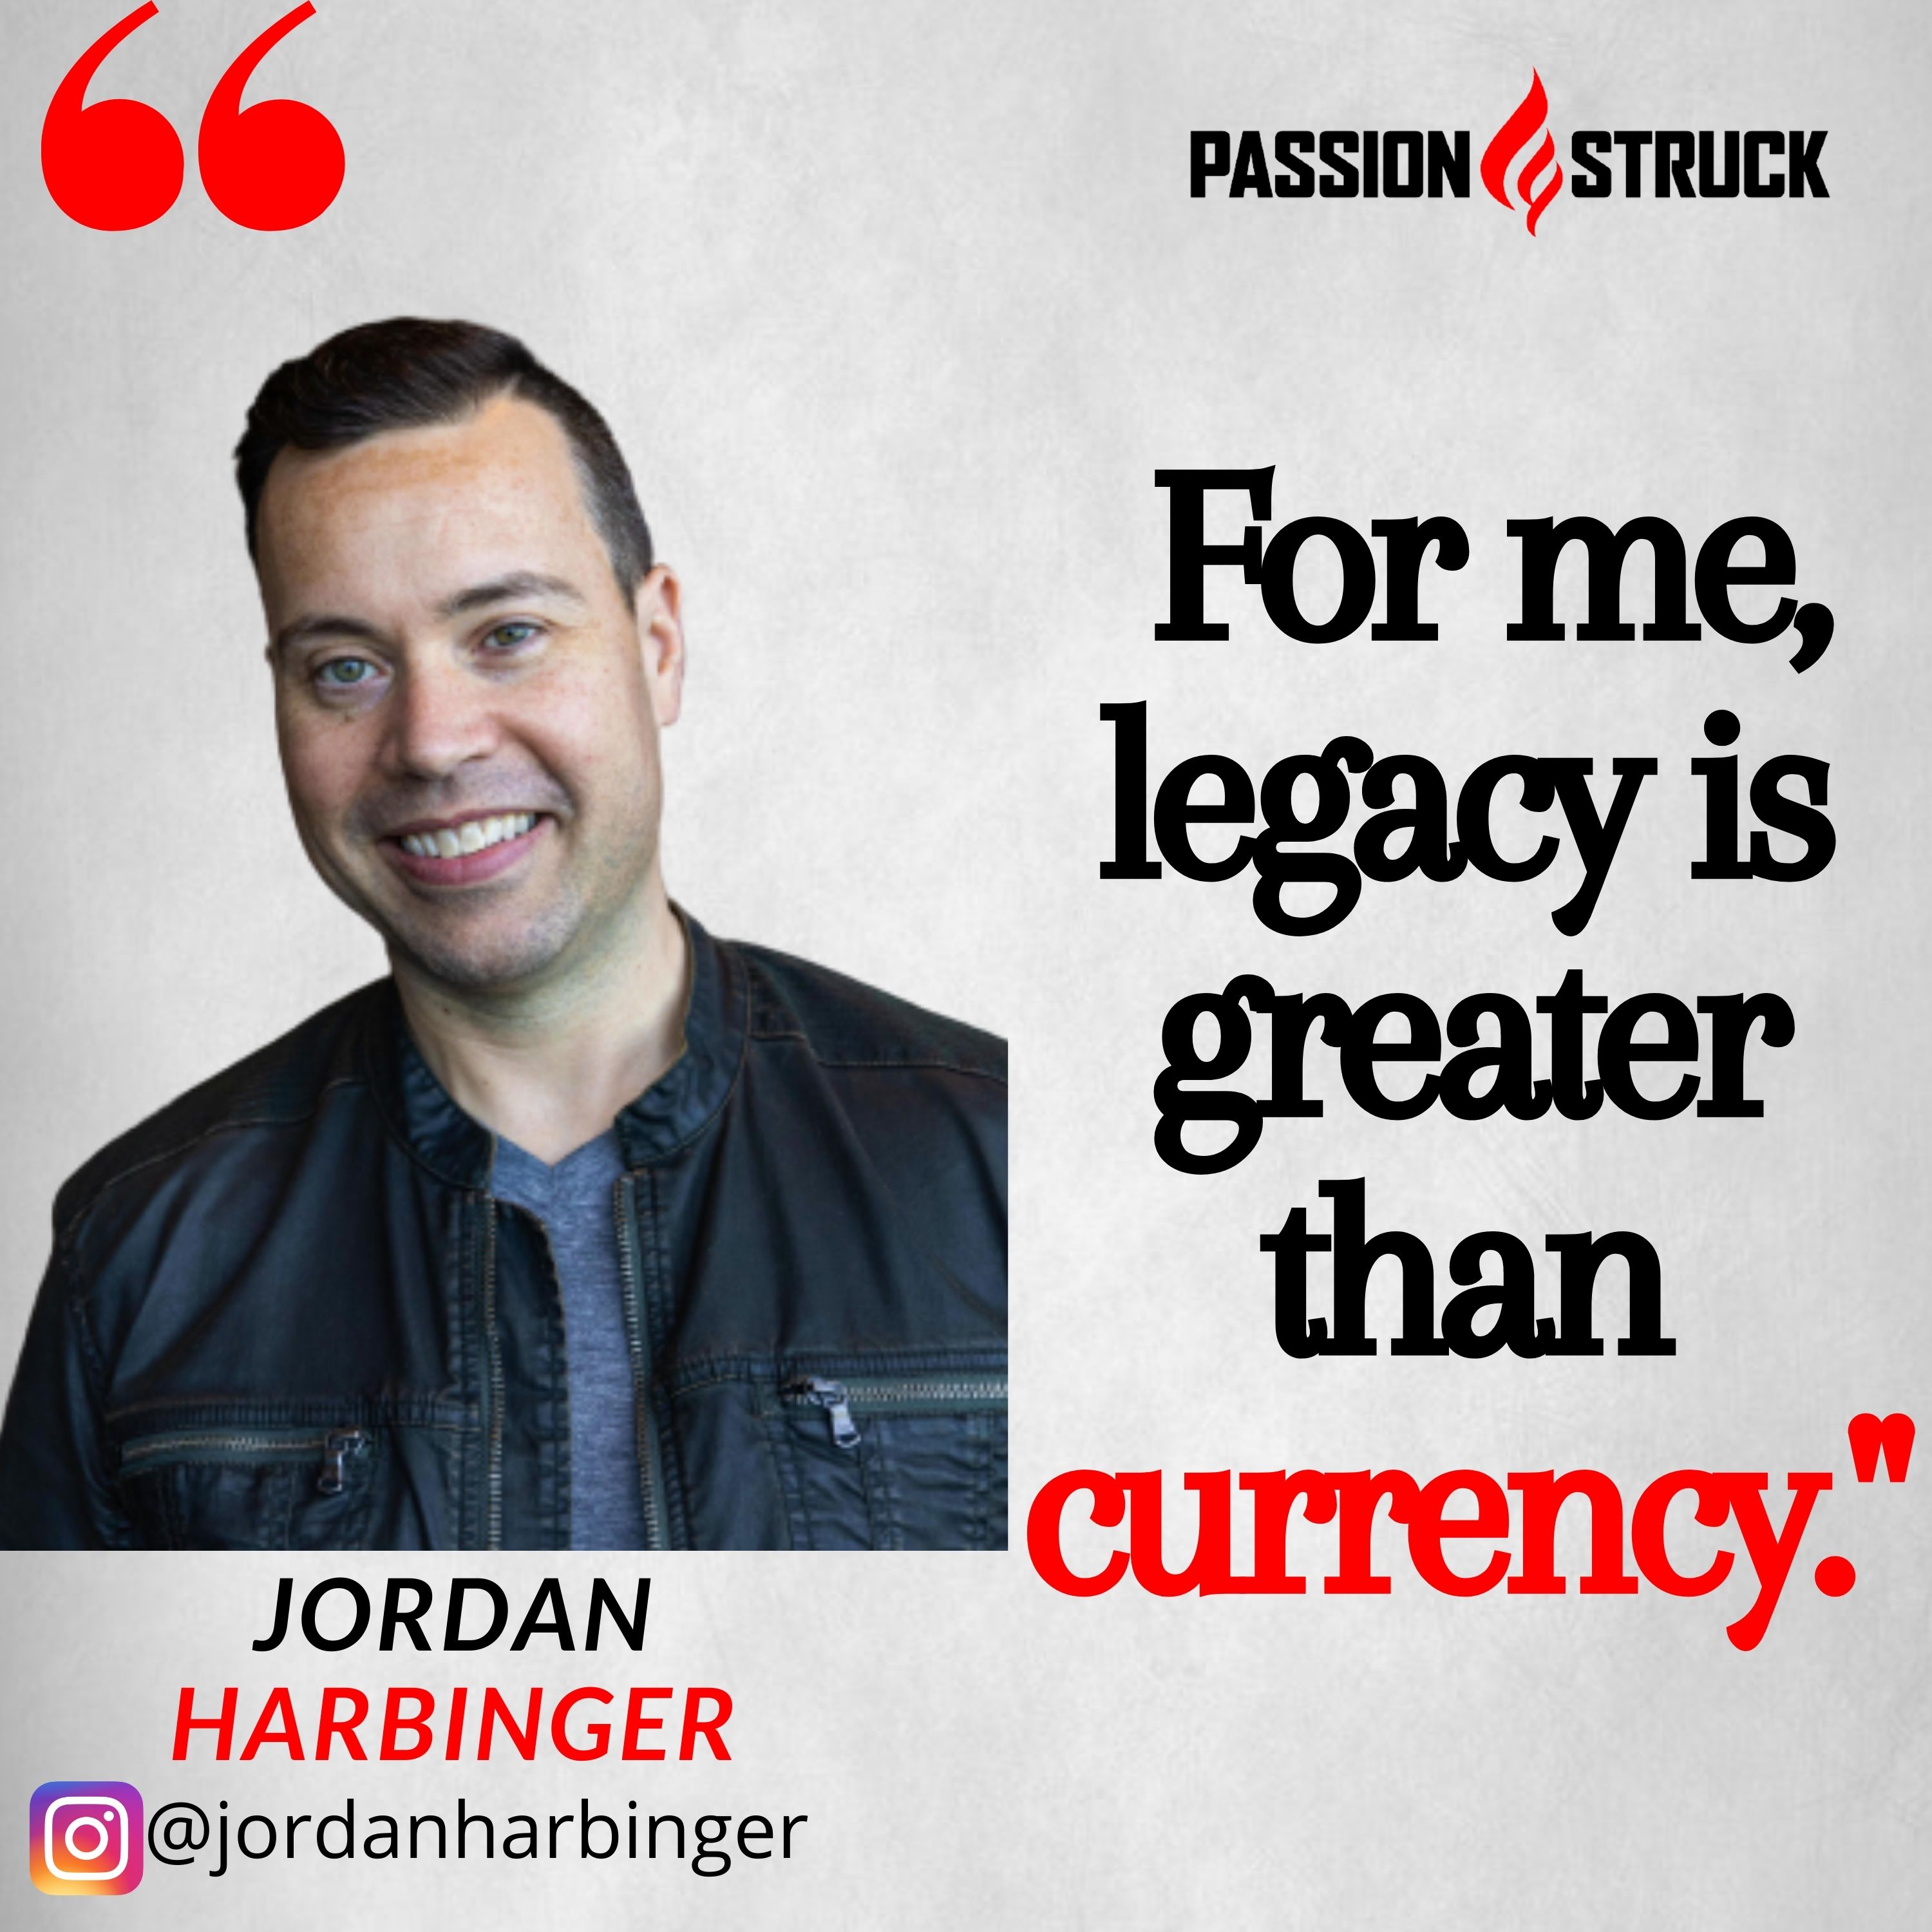 Jordan Harbinger quote from the passion struck podcast that legacy is greater than currency